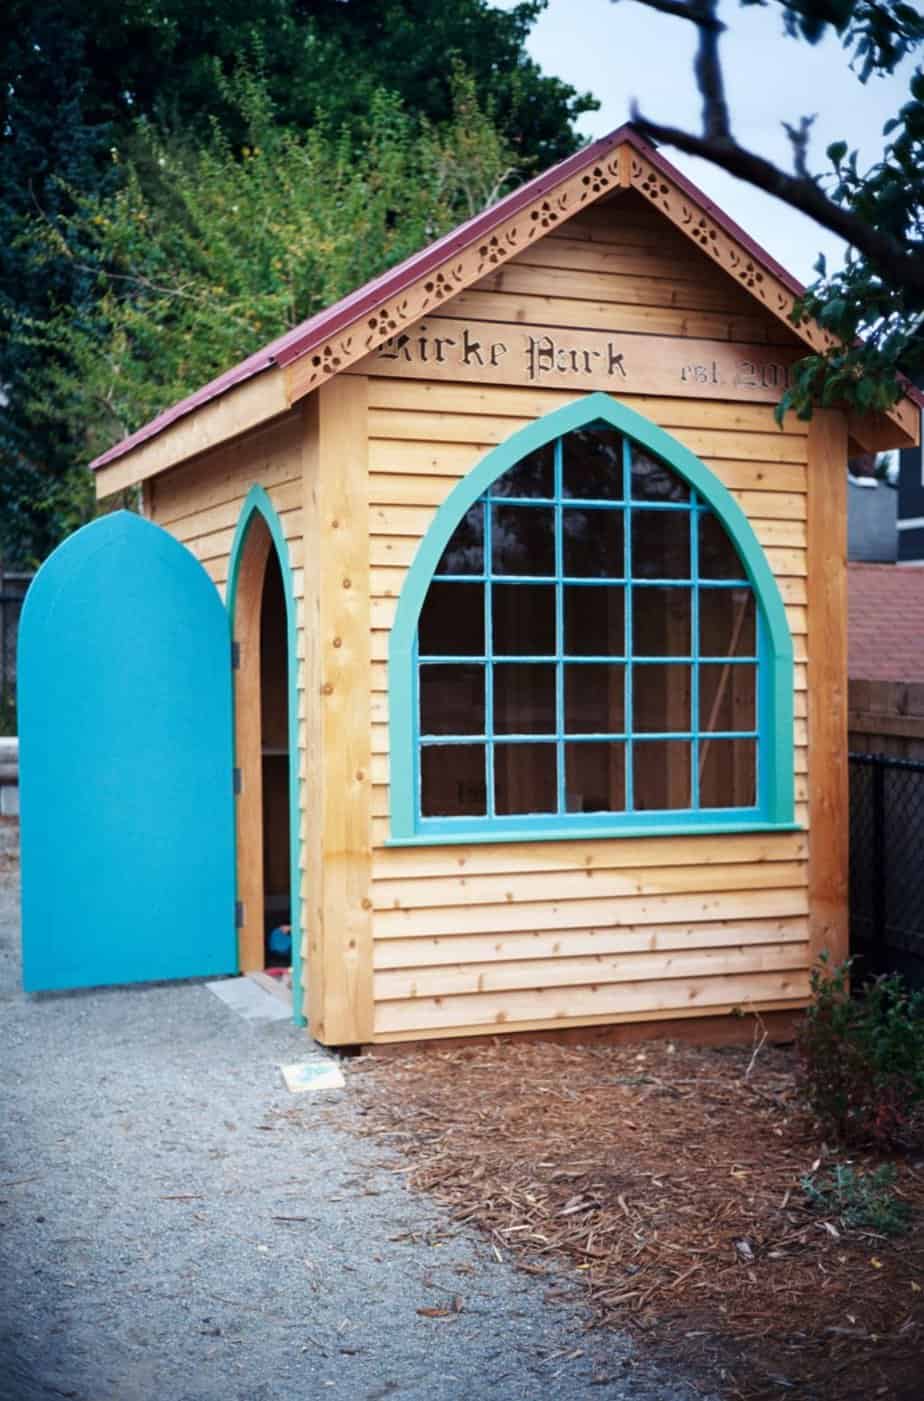 Shed playhouse with blue door